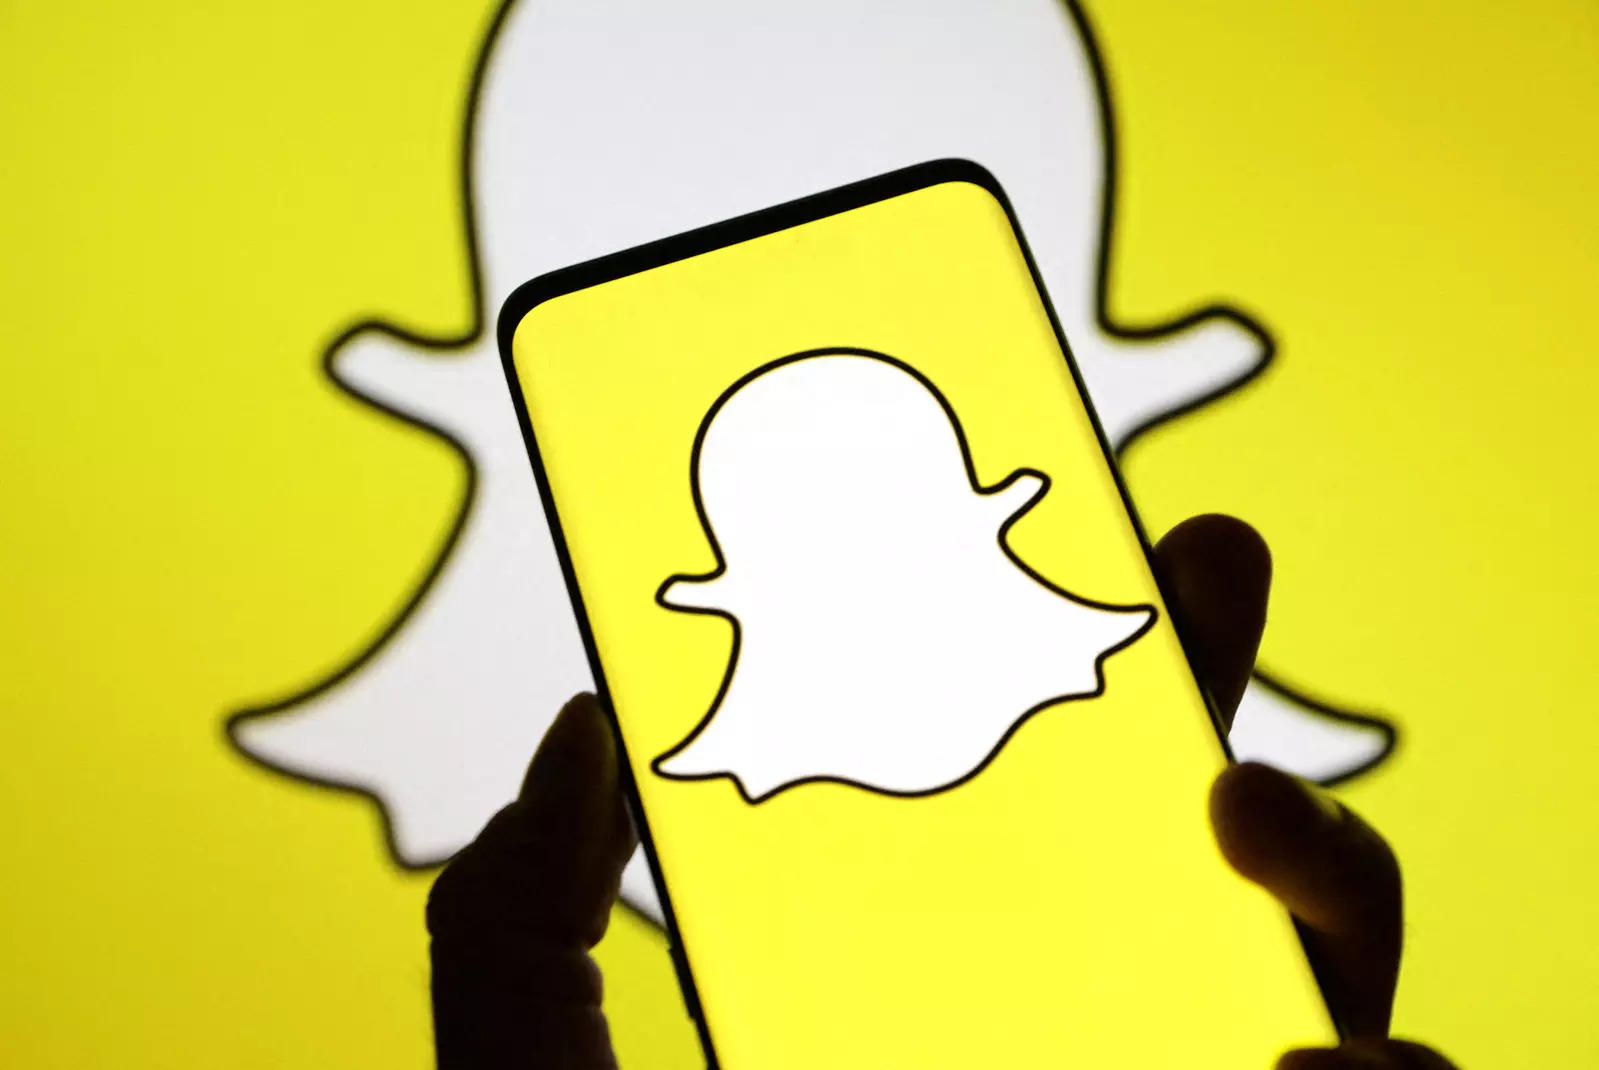 Snap forecasts weak revenue as big rivals threaten growth, shares slide 